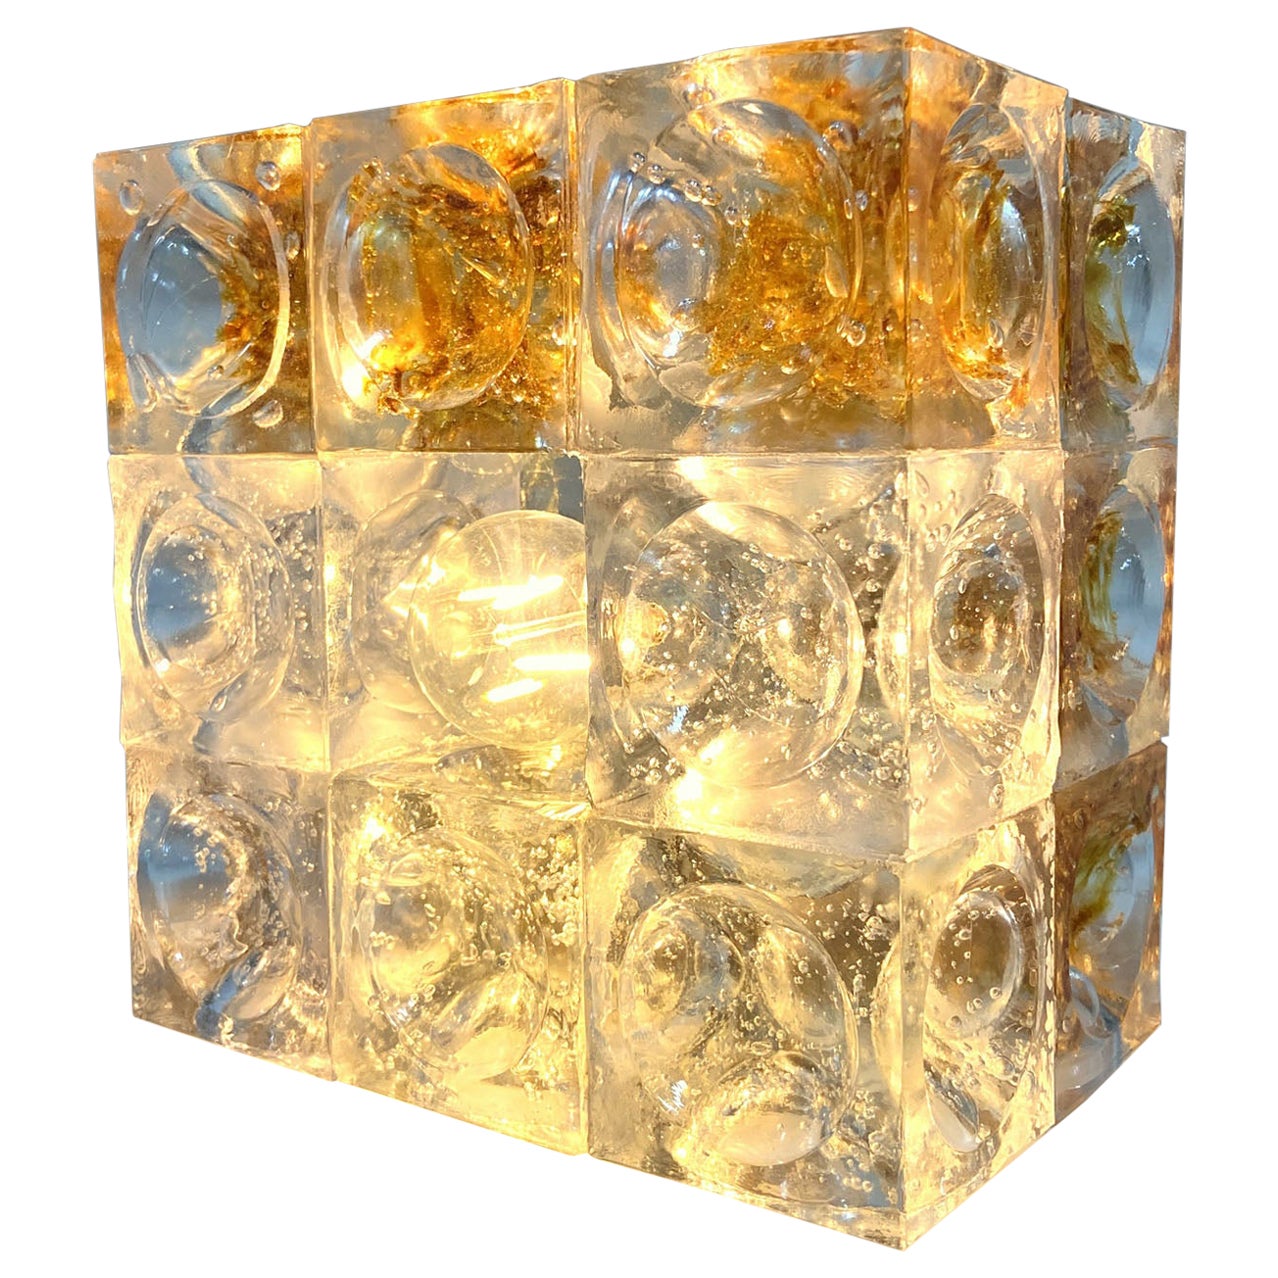 Sculptural Poliarte Table Lamp in Glass Cubes Designed by Albano Poli